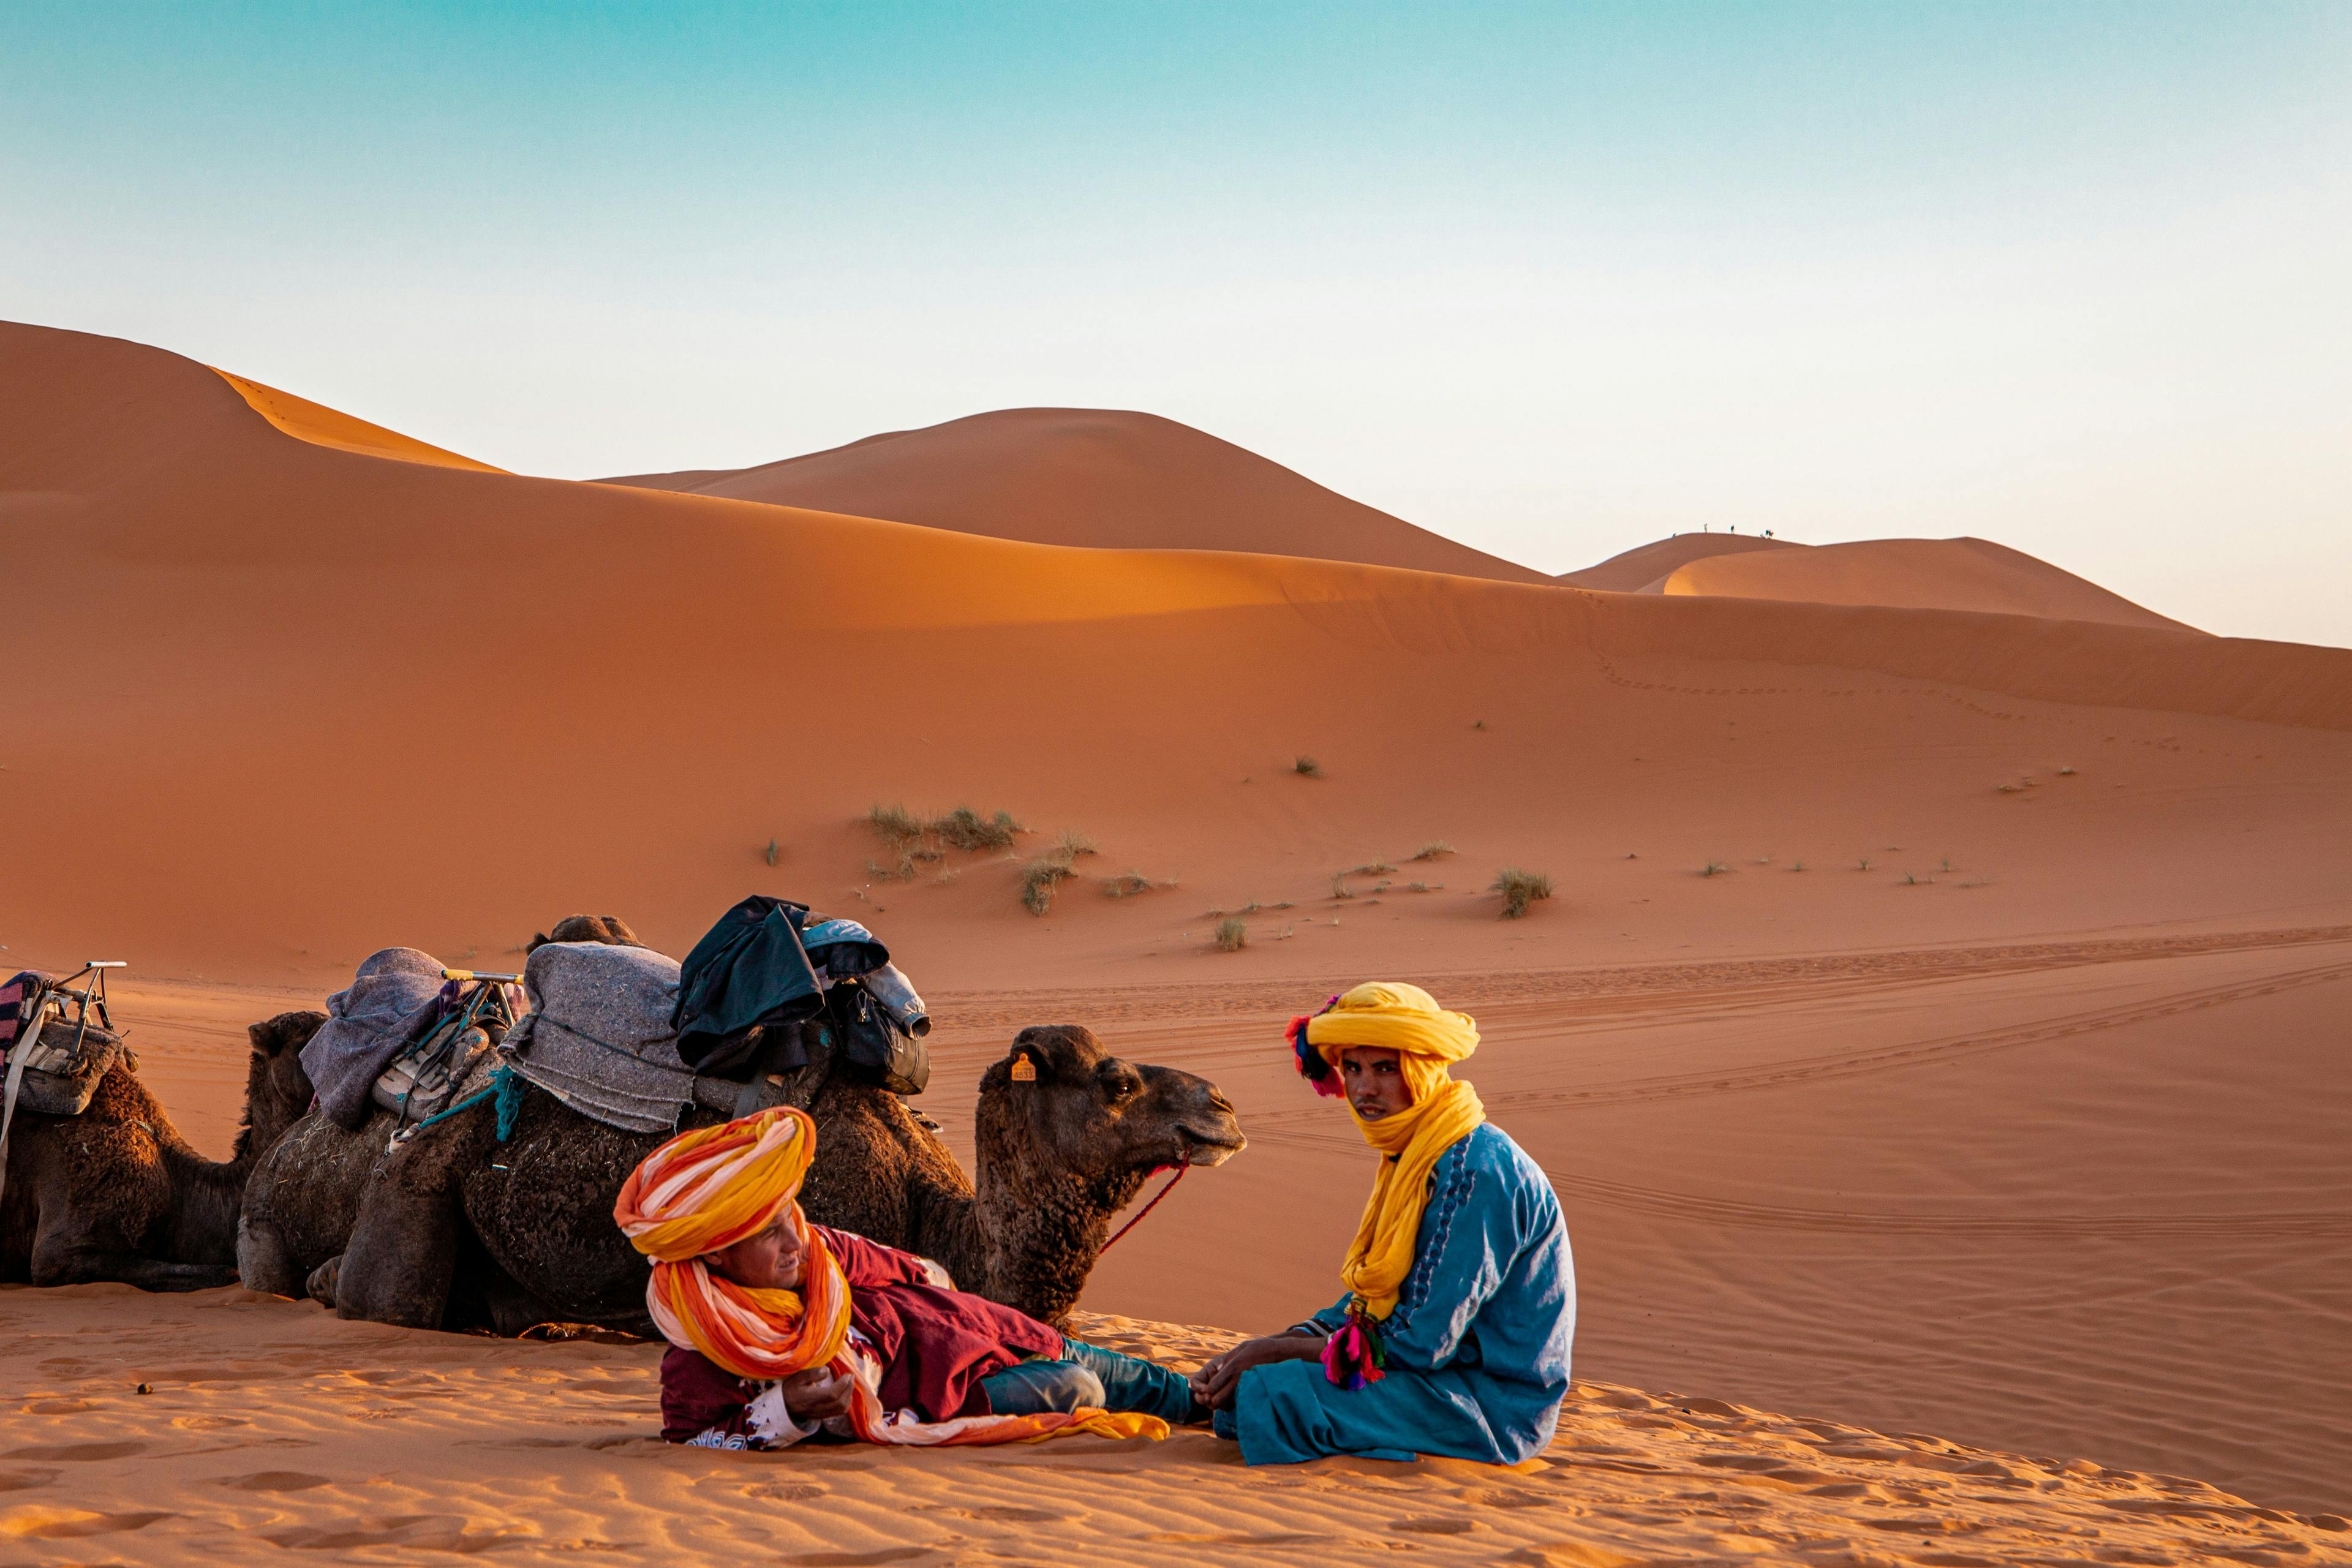 Berber men sitting with camels in Sahara, Morocco.